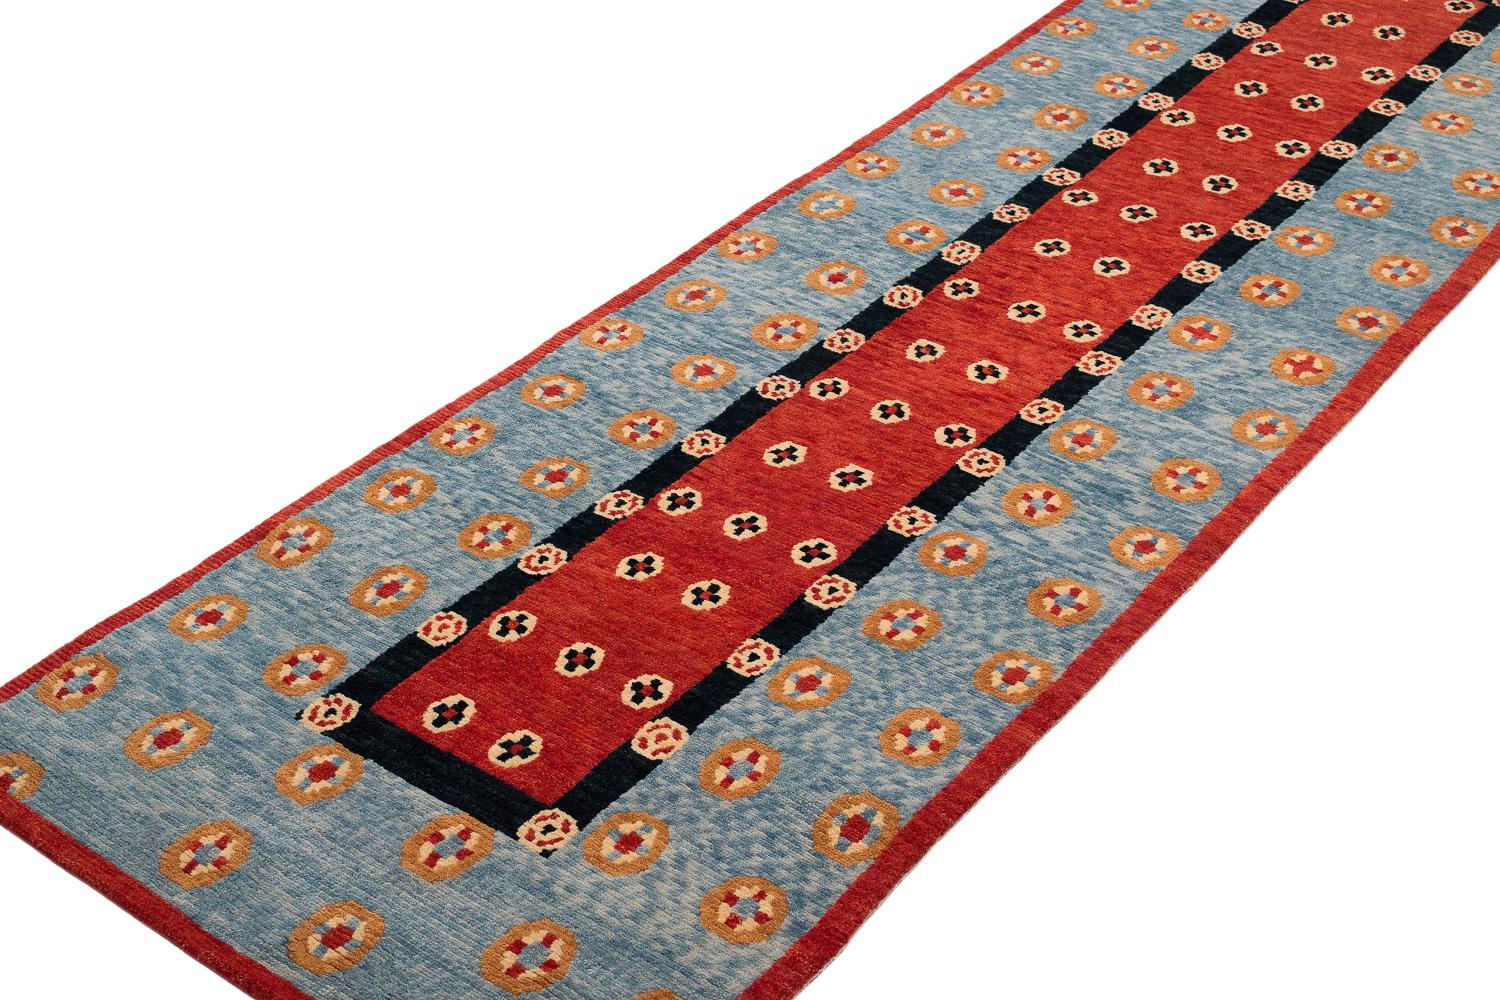 This runner is handwoven in silky hand spun Himalayan wool that is soft to the touch. The area rug features a traditional repeating geometric Tibetan motif in all natural dyes.